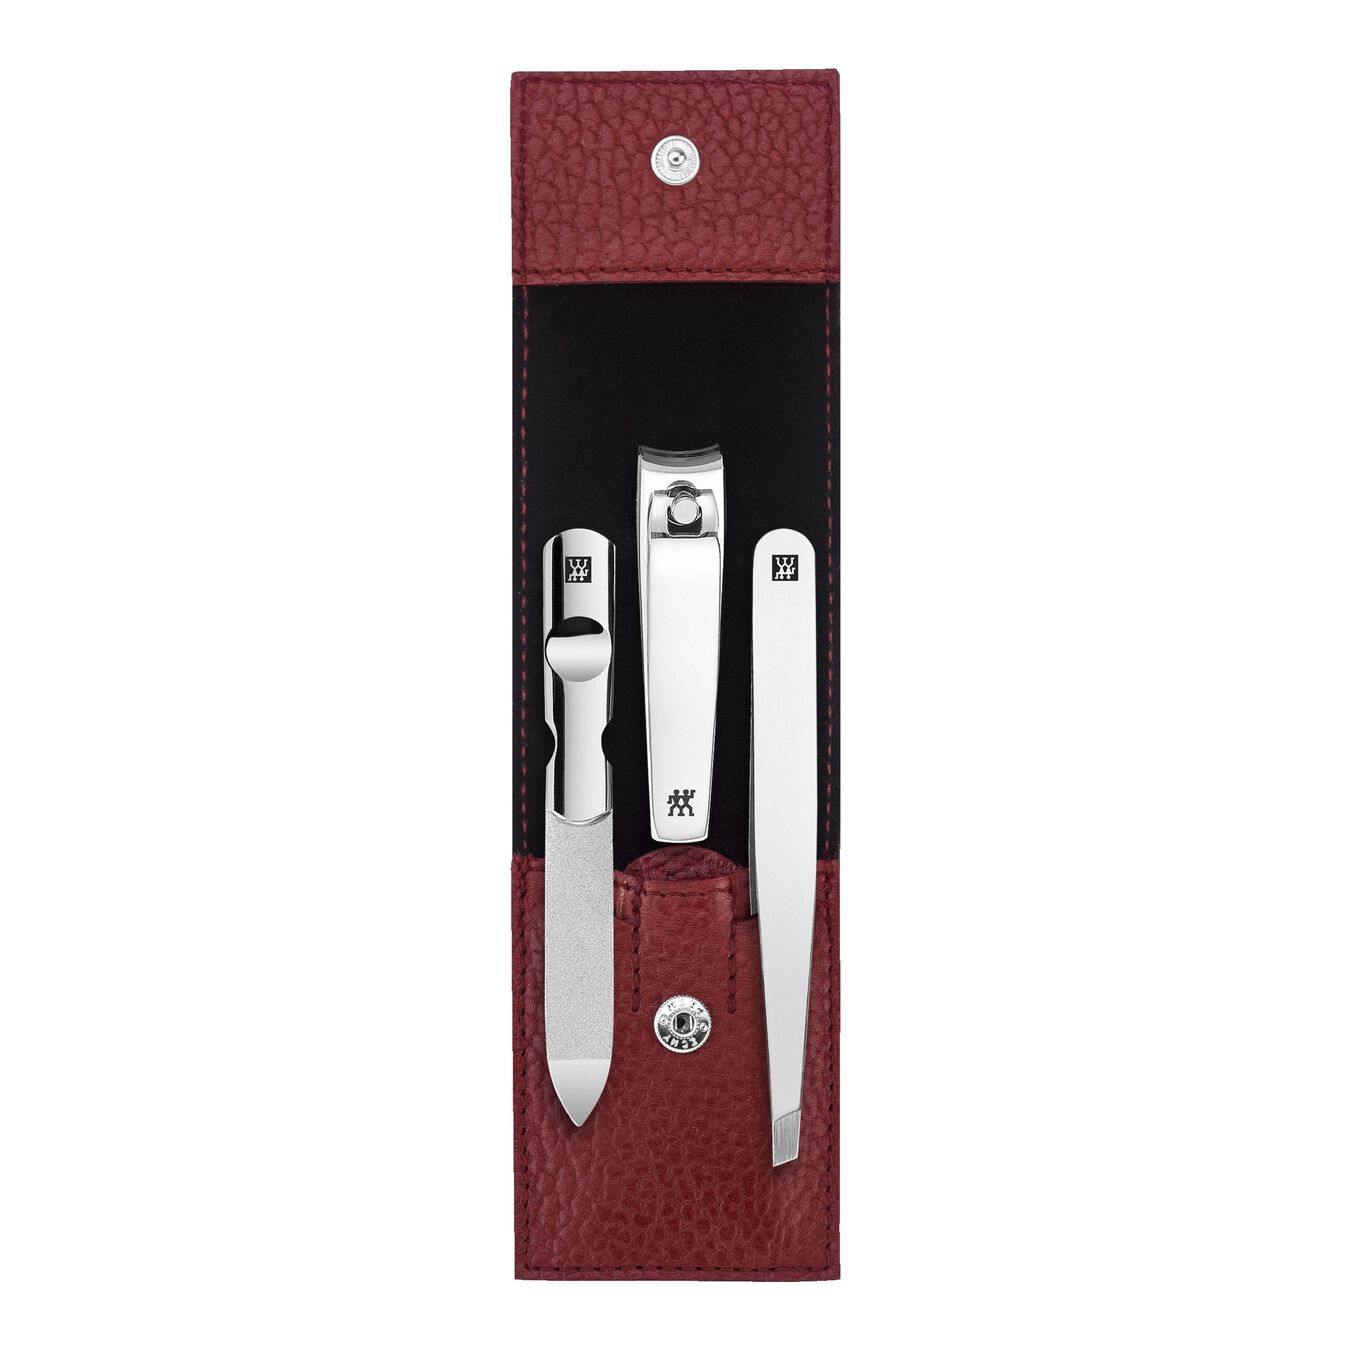 Snap fastener case, 3 Piece | leather | red,,large 1